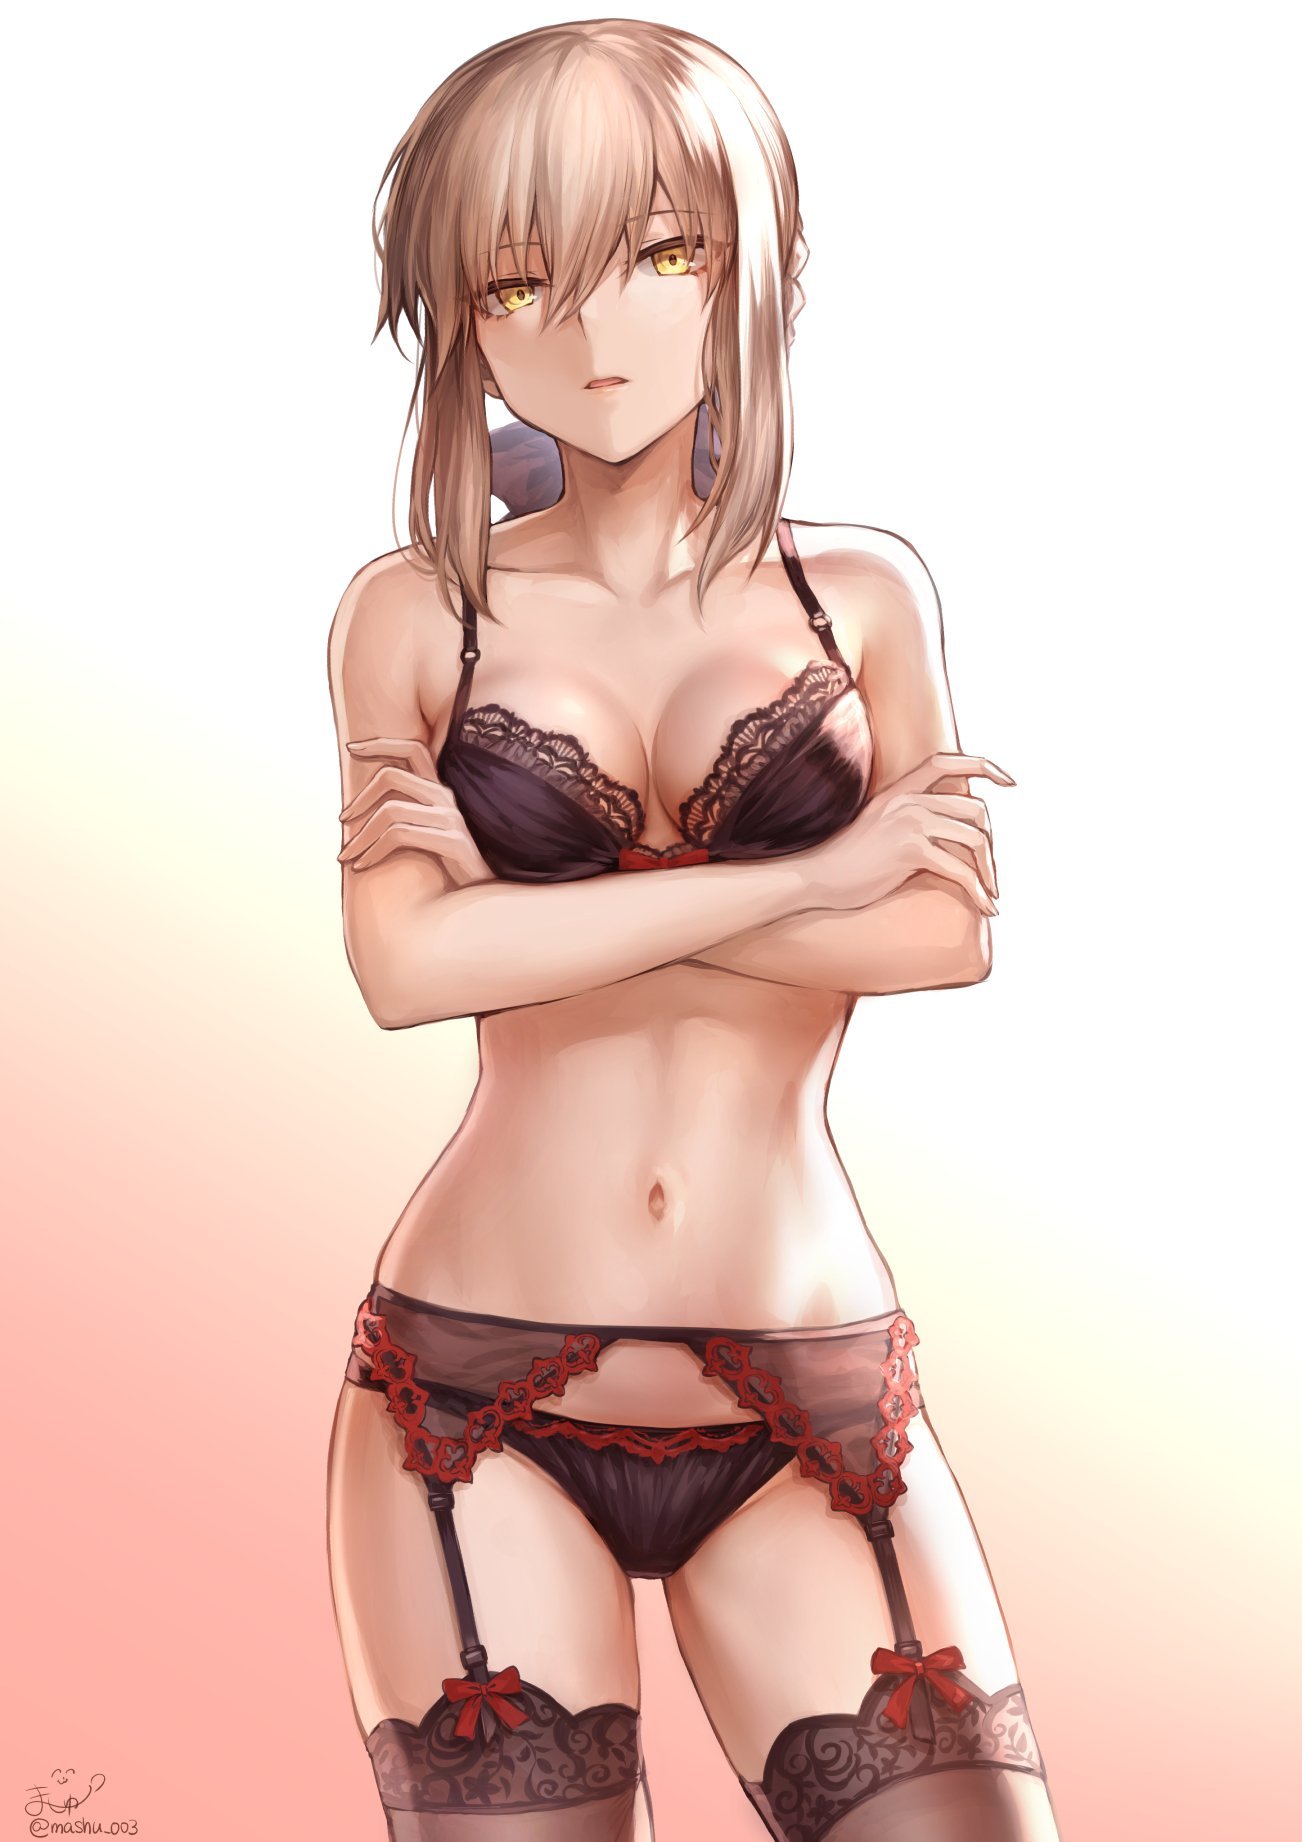 Anime 1302x1842 Fate/Grand Order anime girls simple background Mashu 003 Fate series Fate/Stay Night fate/stay night: heaven's feel black lingerie looking at viewer yellow eyes Saber Alter small boobs thighs cleavage 2D fan art blonde lingerie garter belt thigh-highs underwear Artoria Pendragon